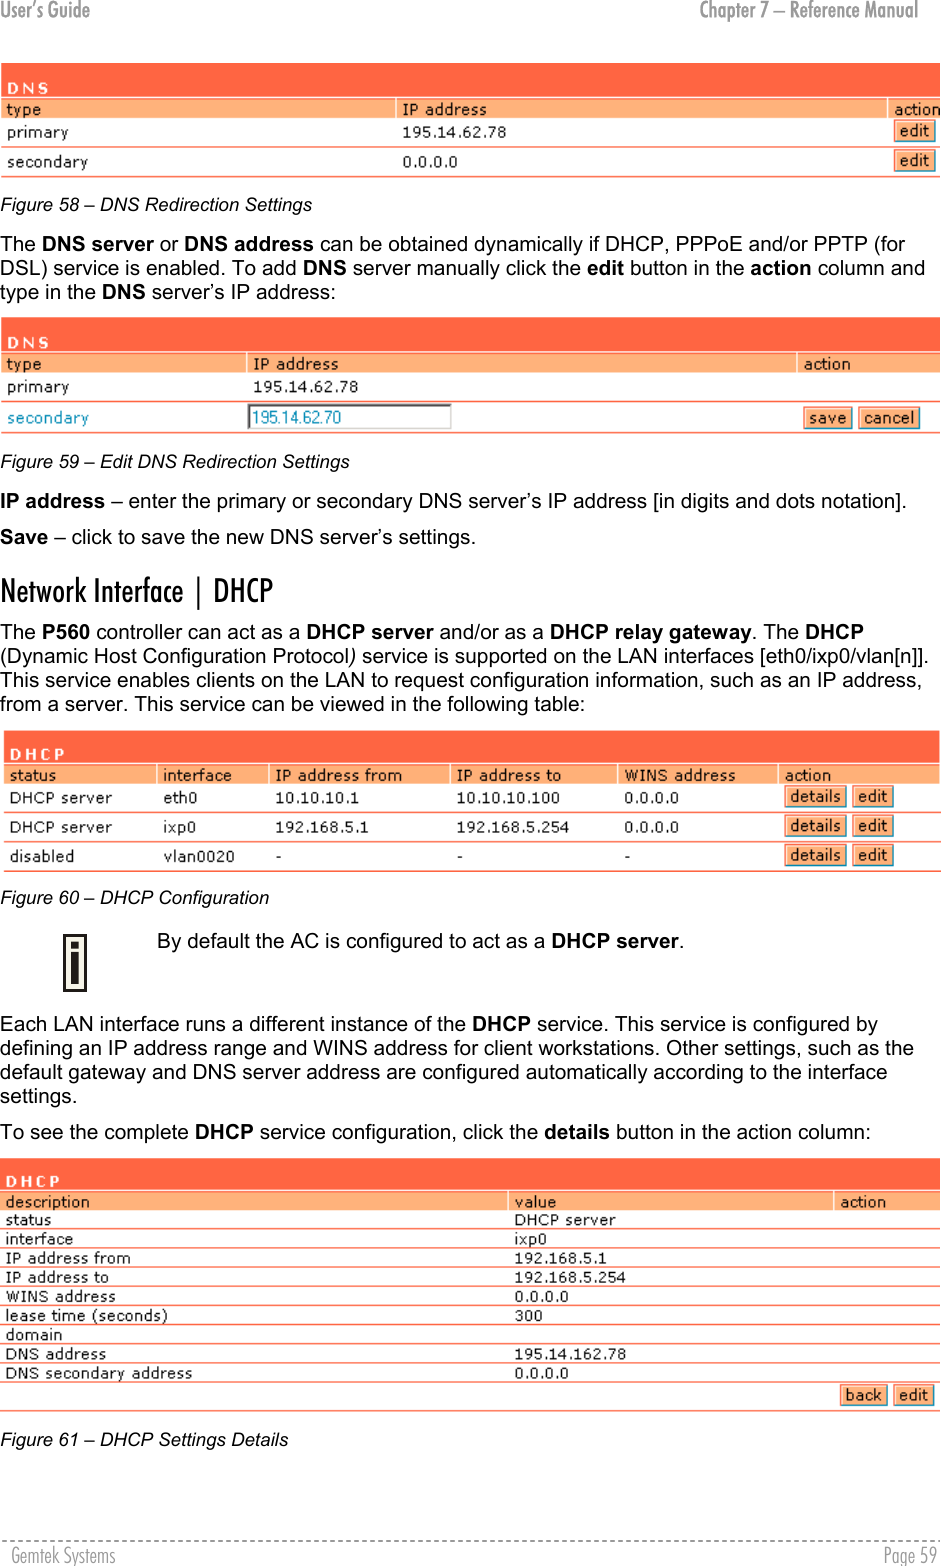 User’s Guide  Chapter 7 – Reference Manual  Figure 58 – DNS Redirection Settings The DNS server or DNS address can be obtained dynamically if DHCP, PPPoE and/or PPTP (for DSL) service is enabled. To add DNS server manually click the edit button in the action column and type in the DNS server’s IP address:  Figure 59 – Edit DNS Redirection Settings IP address – enter the primary or secondary DNS server’s IP address [in digits and dots notation]. Save – click to save the new DNS server’s settings. Network Interface | DHCP  The P560 controller can act as a DHCP server and/or as a DHCP relay gateway. The DHCP (Dynamic Host Configuration Protocol) service is supported on the LAN interfaces [eth0/ixp0/vlan[n]]. This service enables clients on the LAN to request configuration information, such as an IP address, from a server. This service can be viewed in the following table:  Figure 60 – DHCP Configuration  By default the AC is configured to act as a DHCP server. Each LAN interface runs a different instance of the DHCP service. This service is configured by defining an IP address range and WINS address for client workstations. Other settings, such as the default gateway and DNS server address are configured automatically according to the interface settings. To see the complete DHCP service configuration, click the details button in the action column:  Figure 61 – DHCP Settings Details  Gemtek Systems    Page 59  